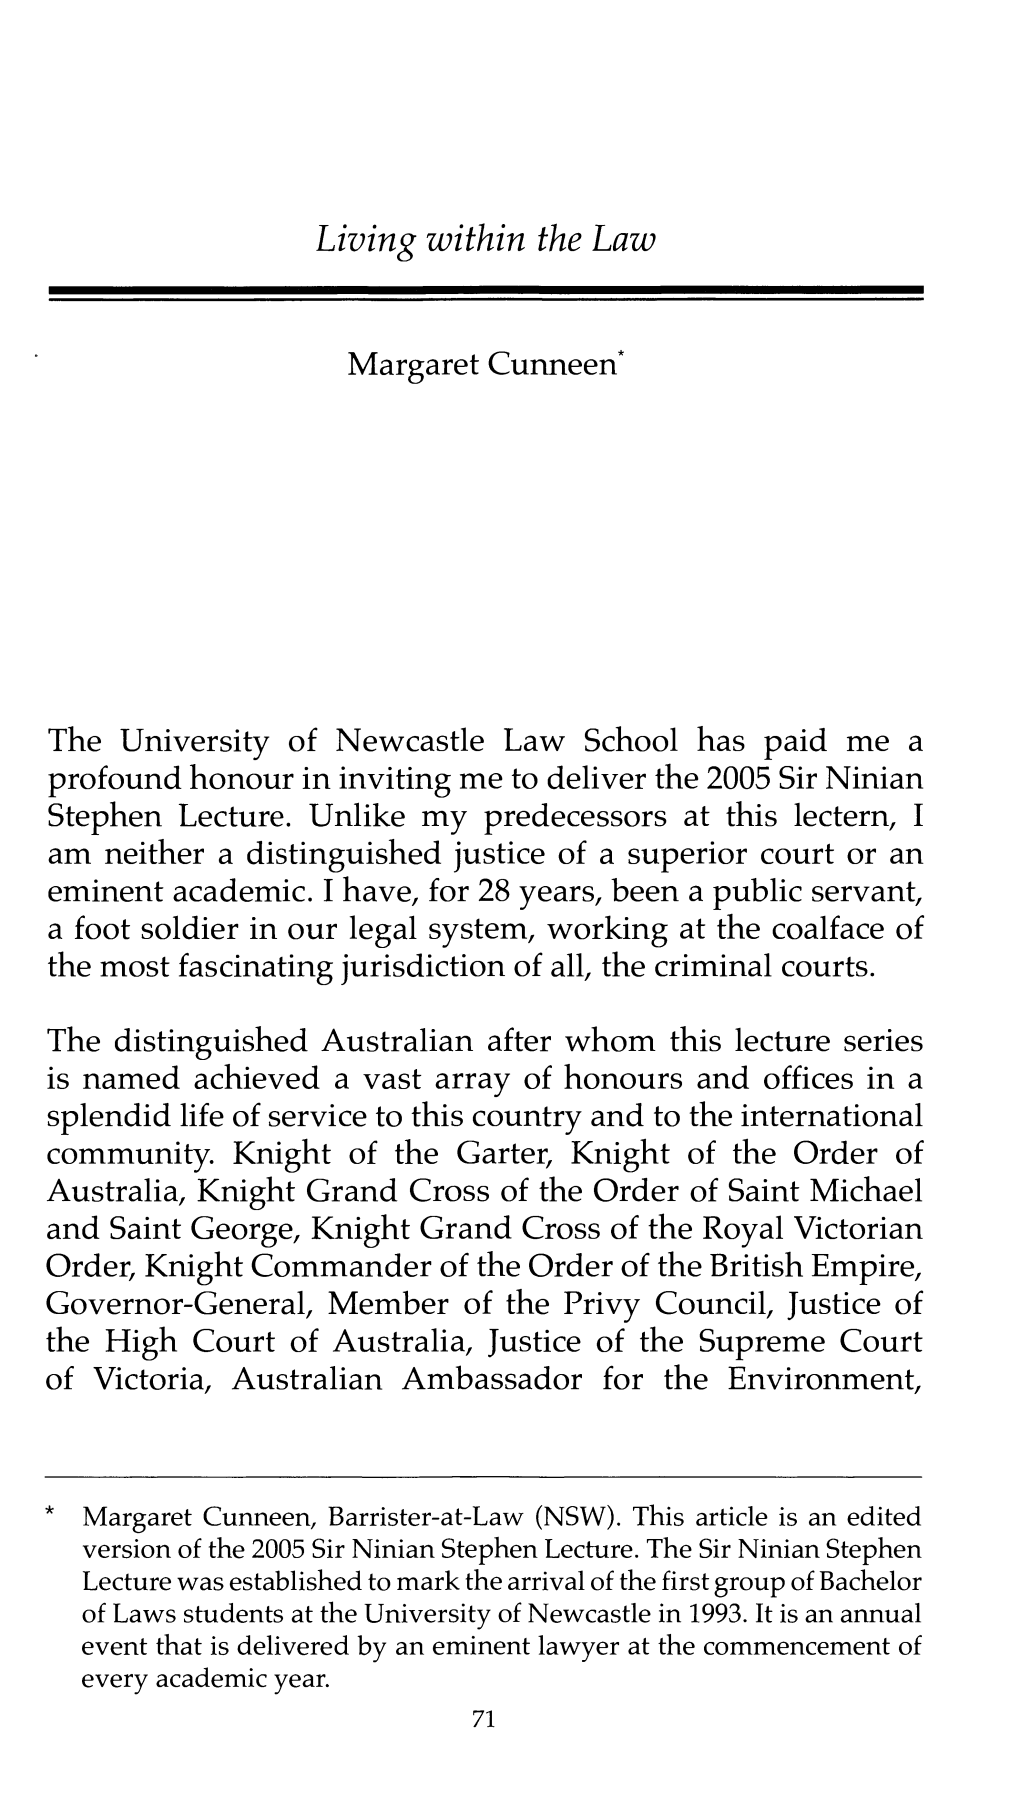 Living Within the Law Margaret Cunneen* the University of Newcastle Law School Has Paid Me a Profound Honour in Inviting Me to D